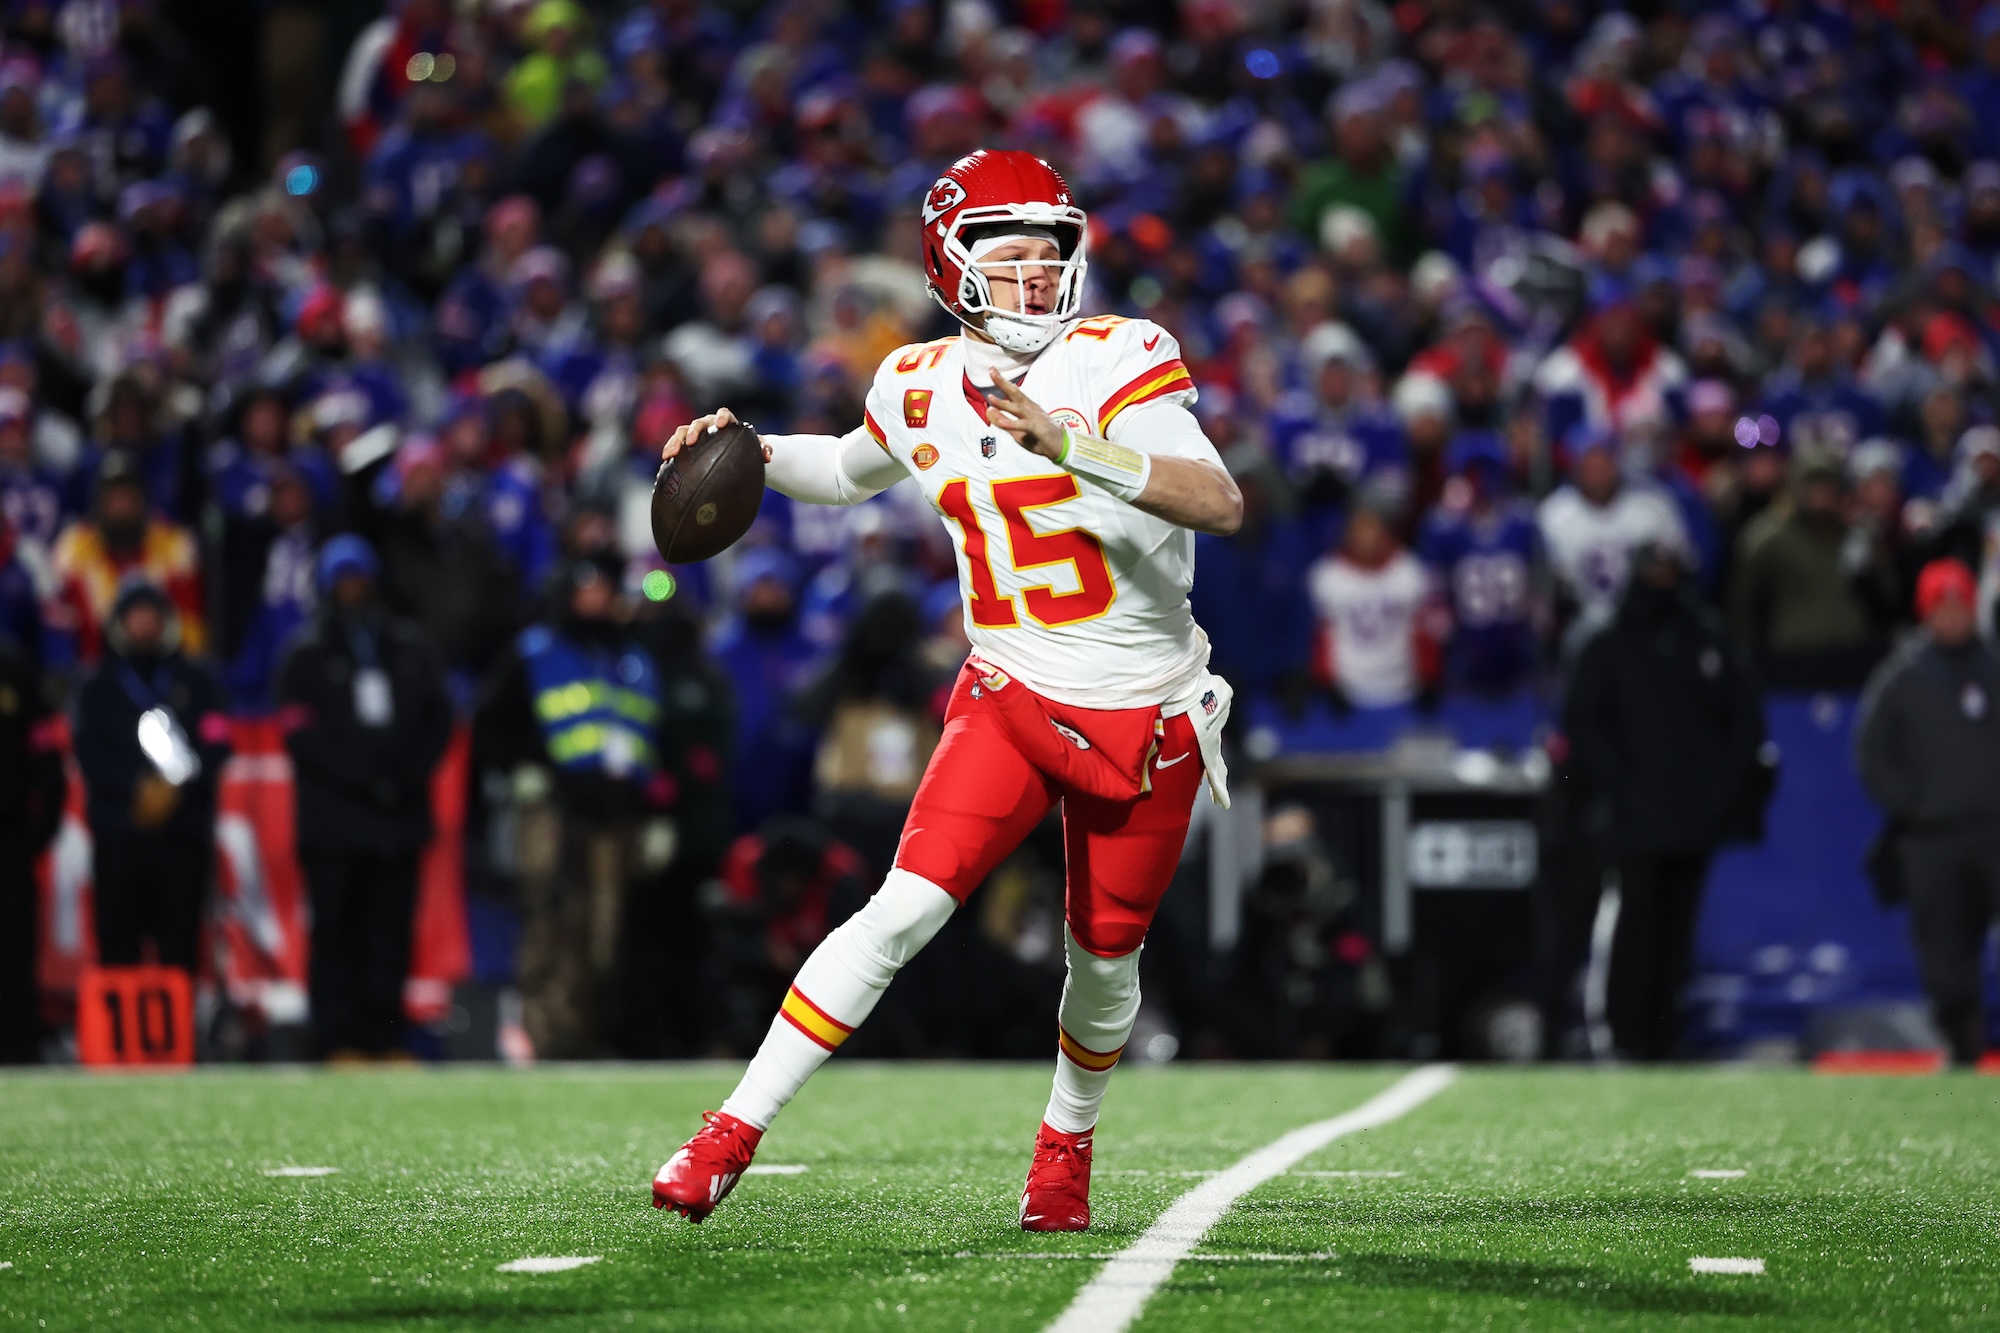 patrick mahomes fires back at dion dawkins, bills in postgame speech: ‘they asked for it, and they got what they asked for’